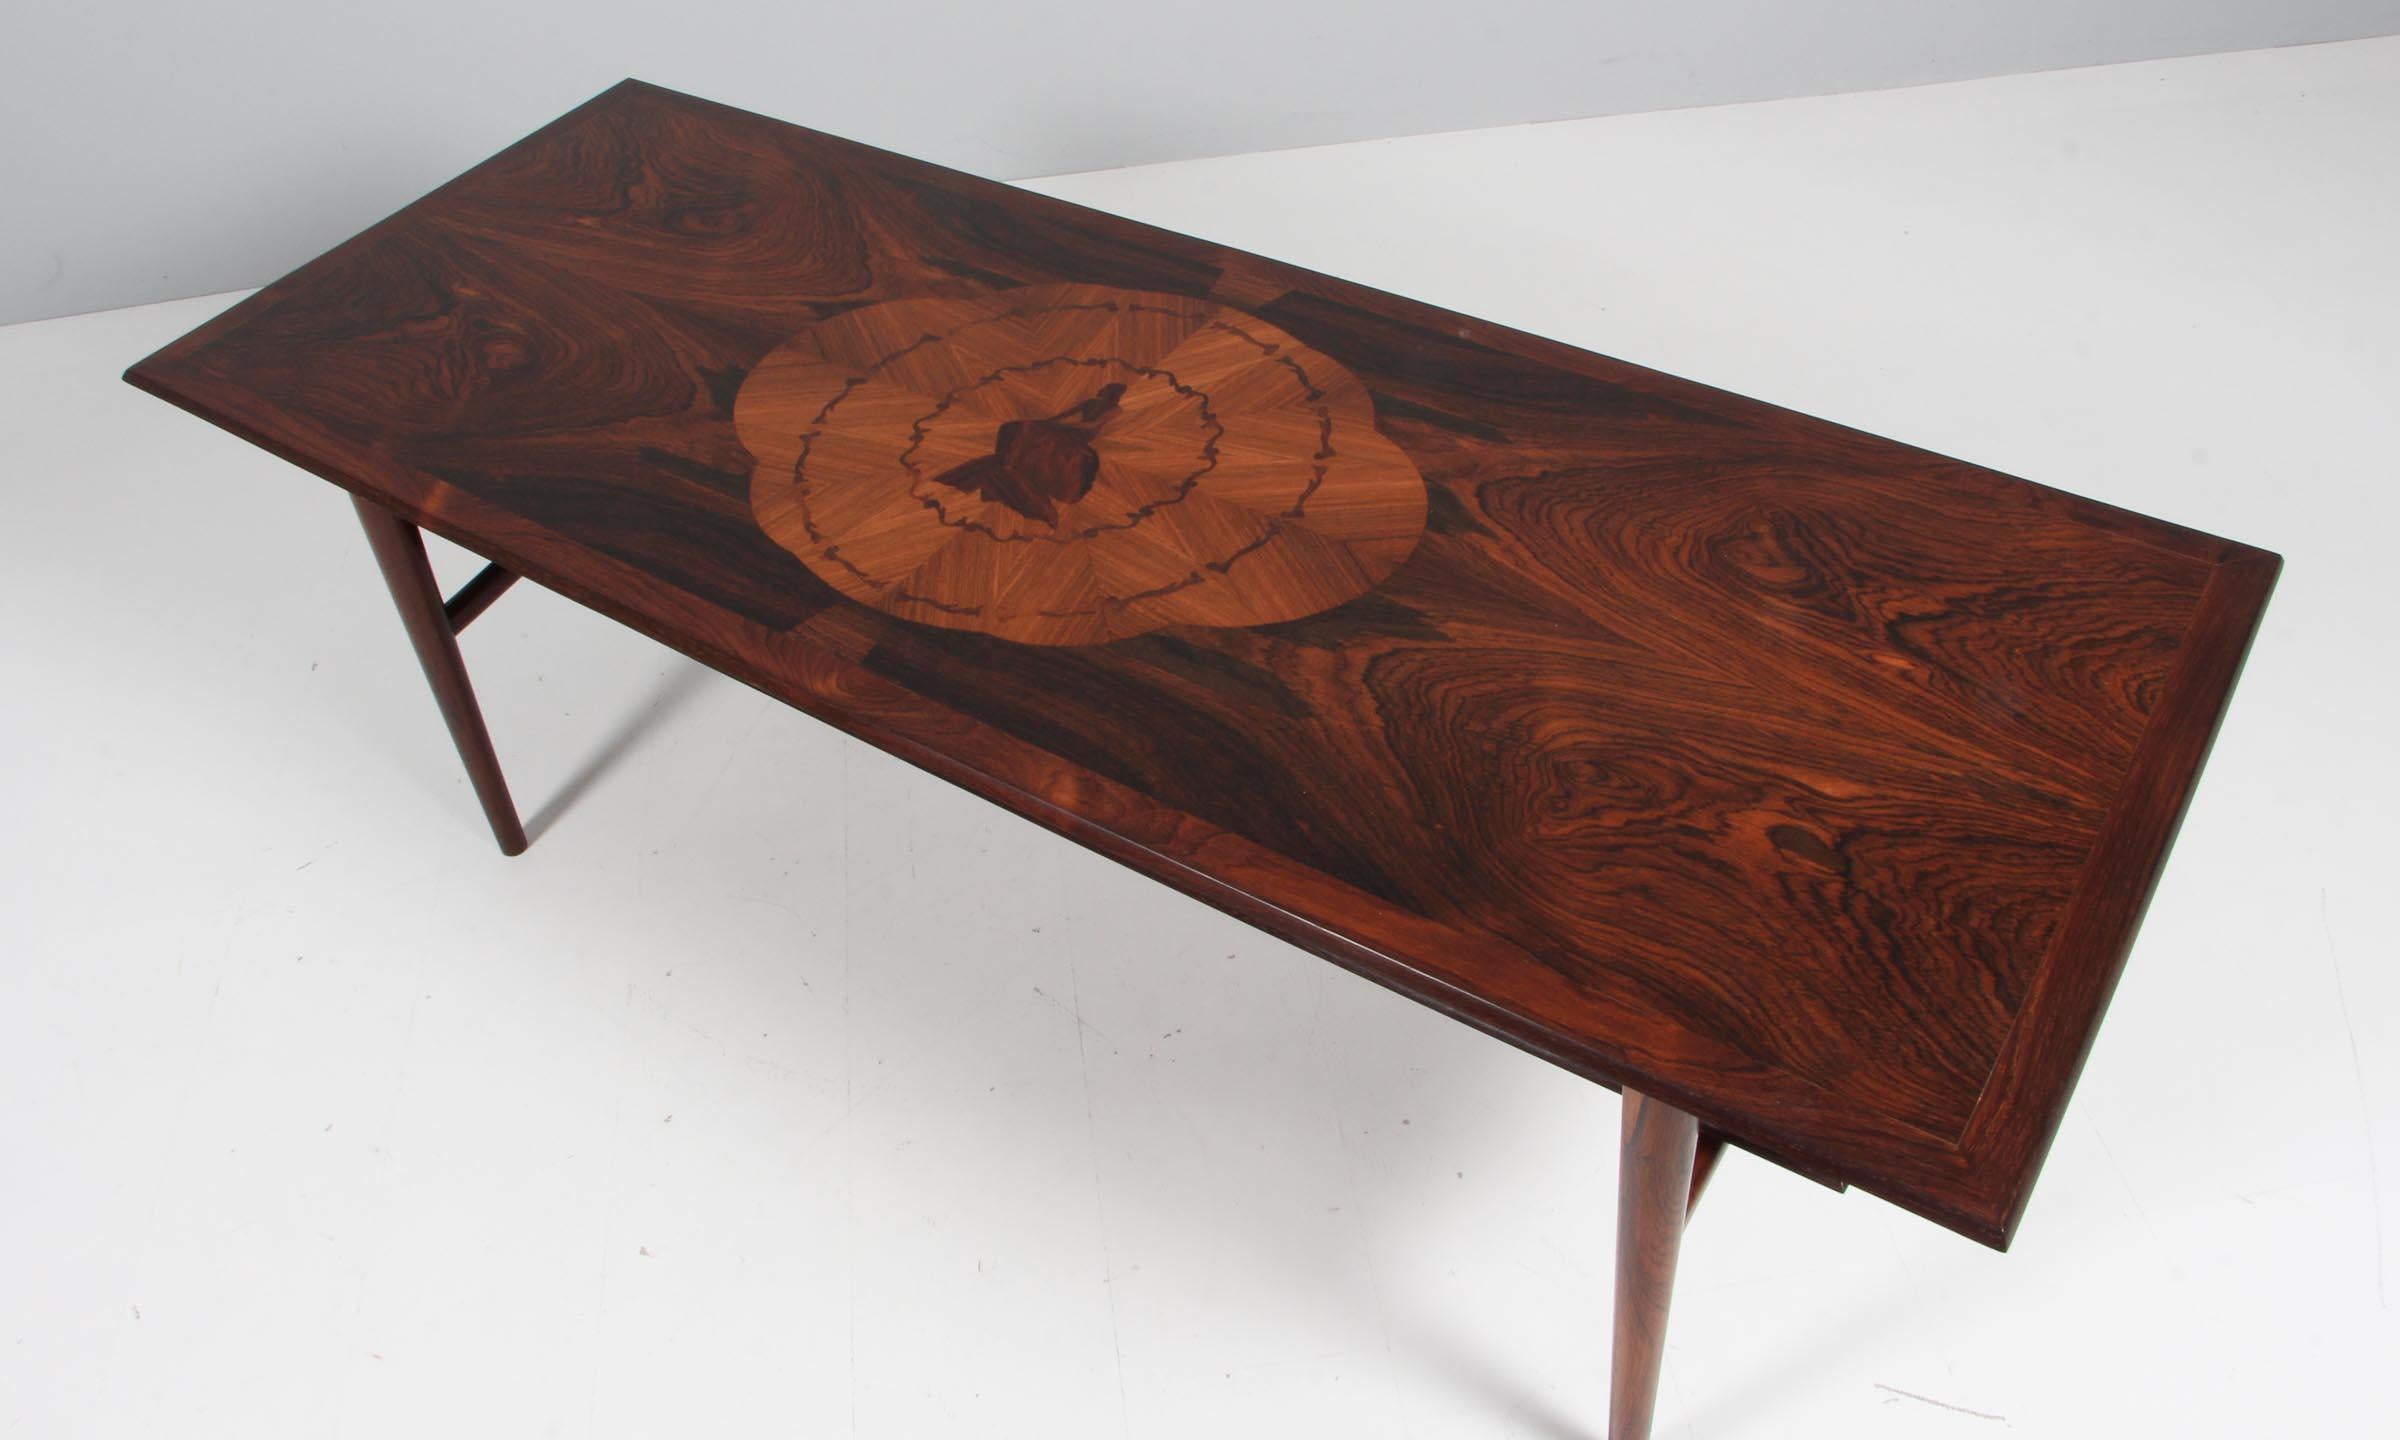 Danish Cabinetmaker sofa table in rosewood with intarsia work of the famous little mermaid.

Made in the 1950s.